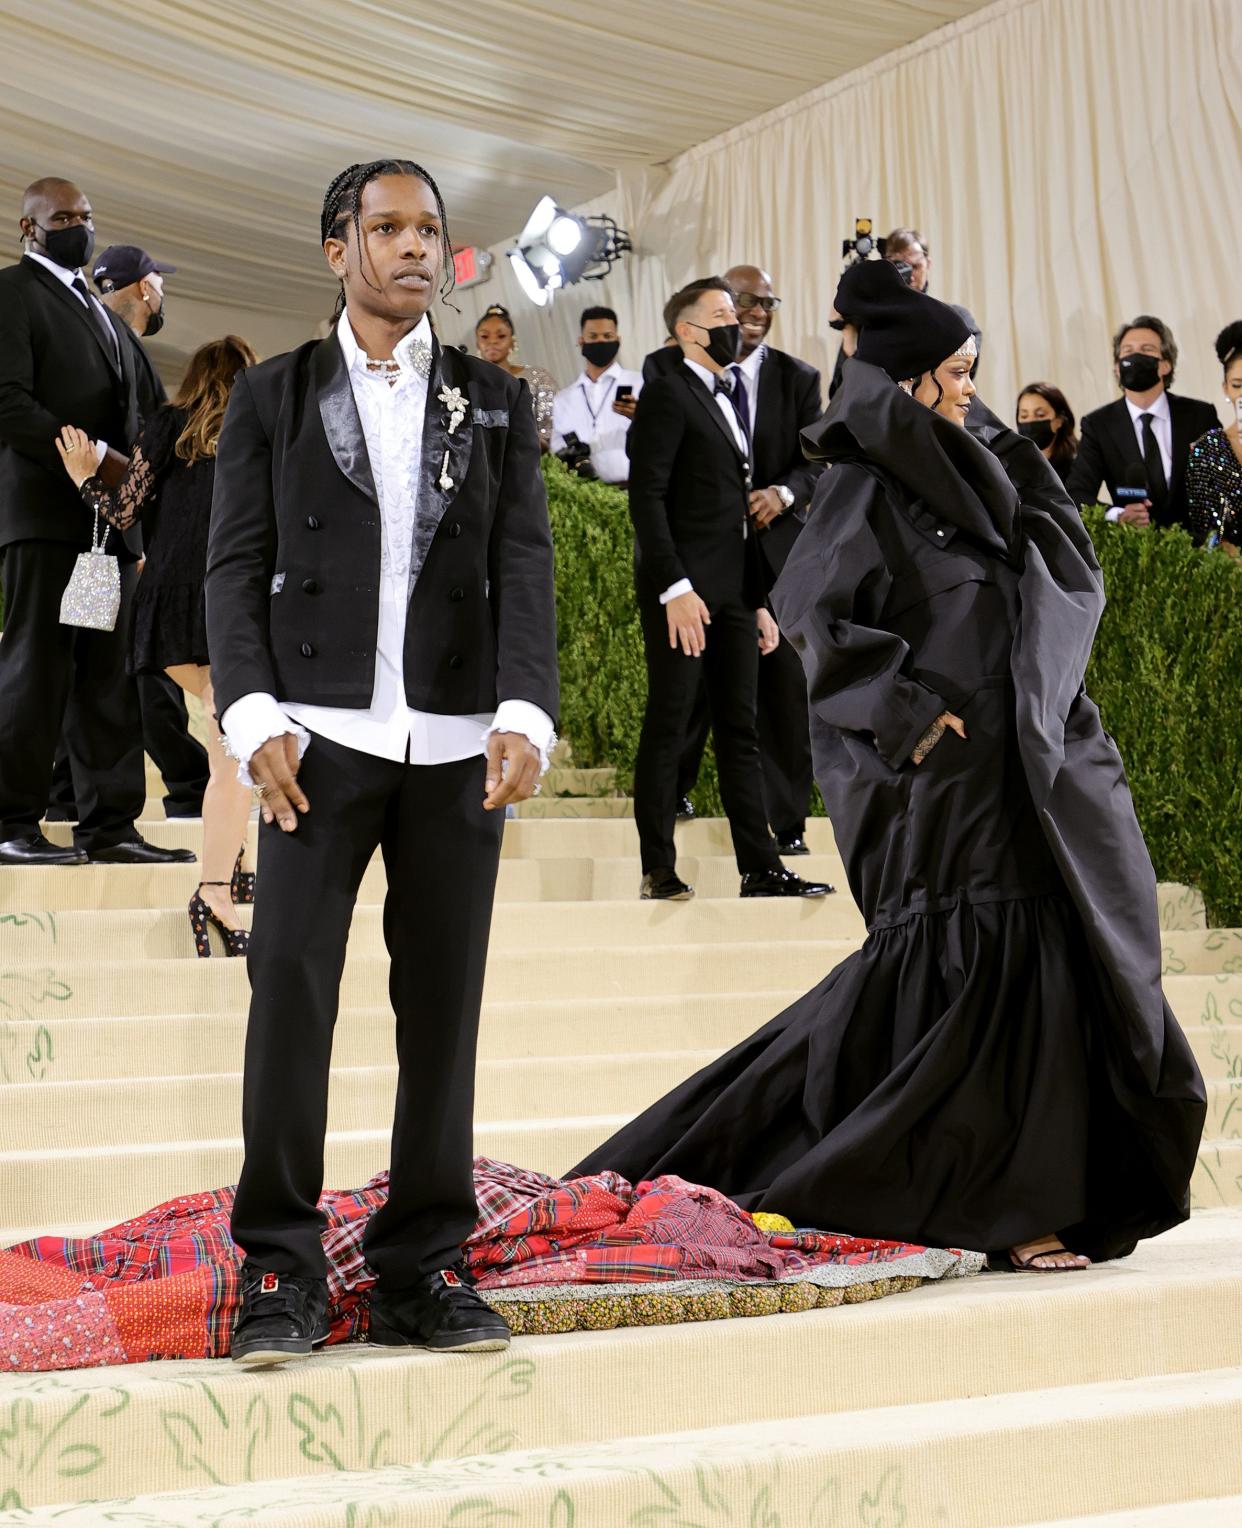 ASAP Rocky and Rihanna attend The 2021 Met Gala Celebrating In America: A Lexicon Of Fashion at Metropolitan Museum of Art on Sept. 13, 2021 in New York.